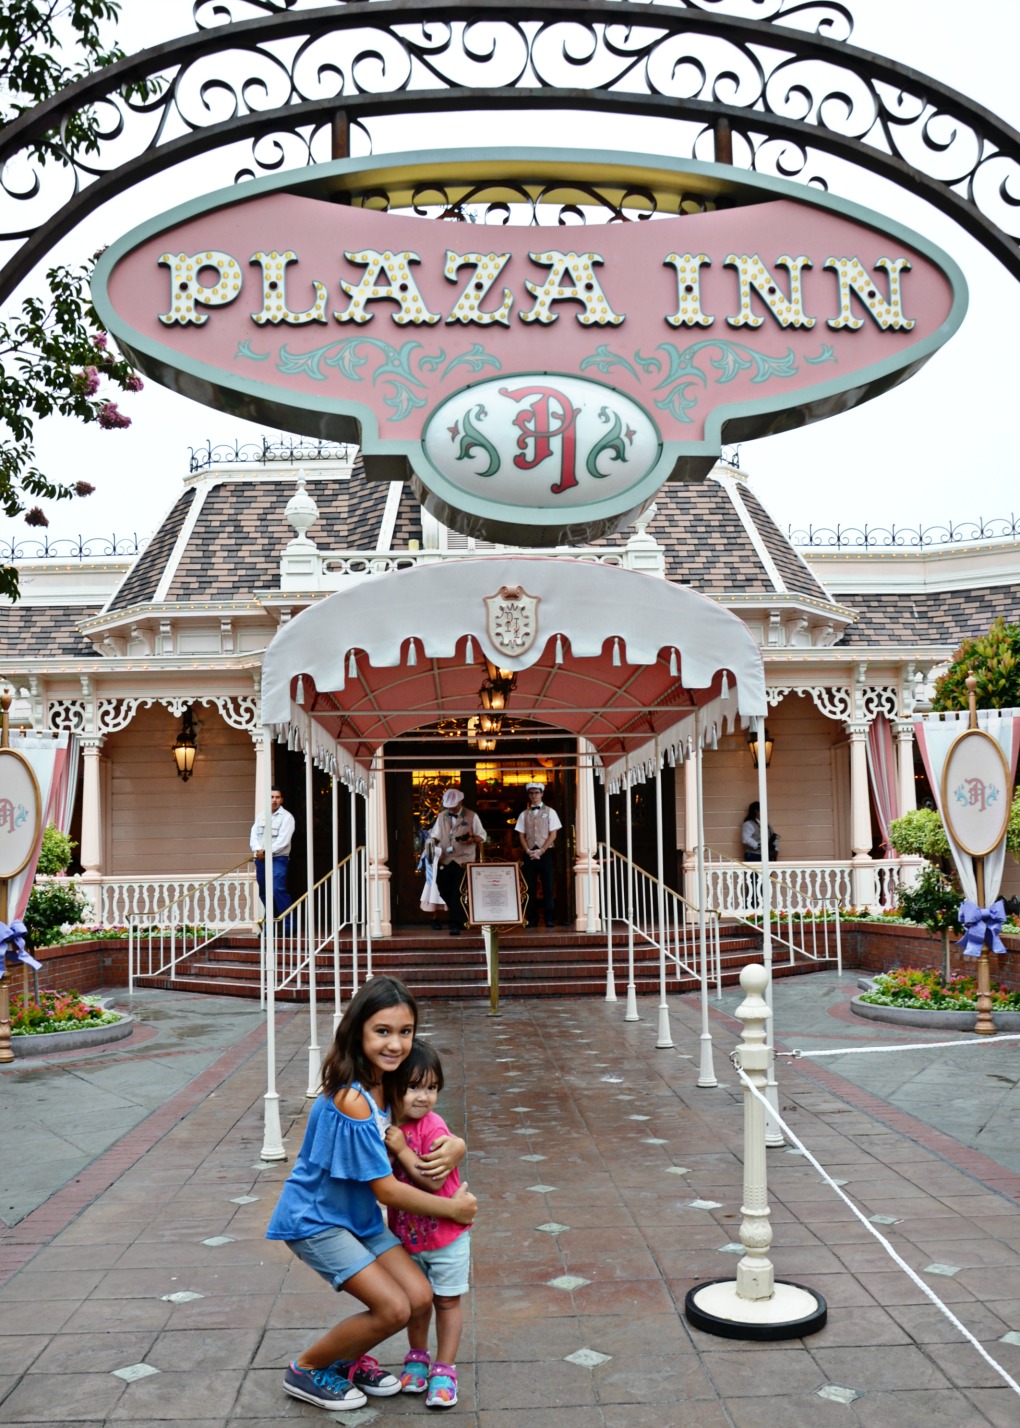 My Disneyland Character Dining Plaza Inn tips will help you create a magical experience during your next Disneyland visit!